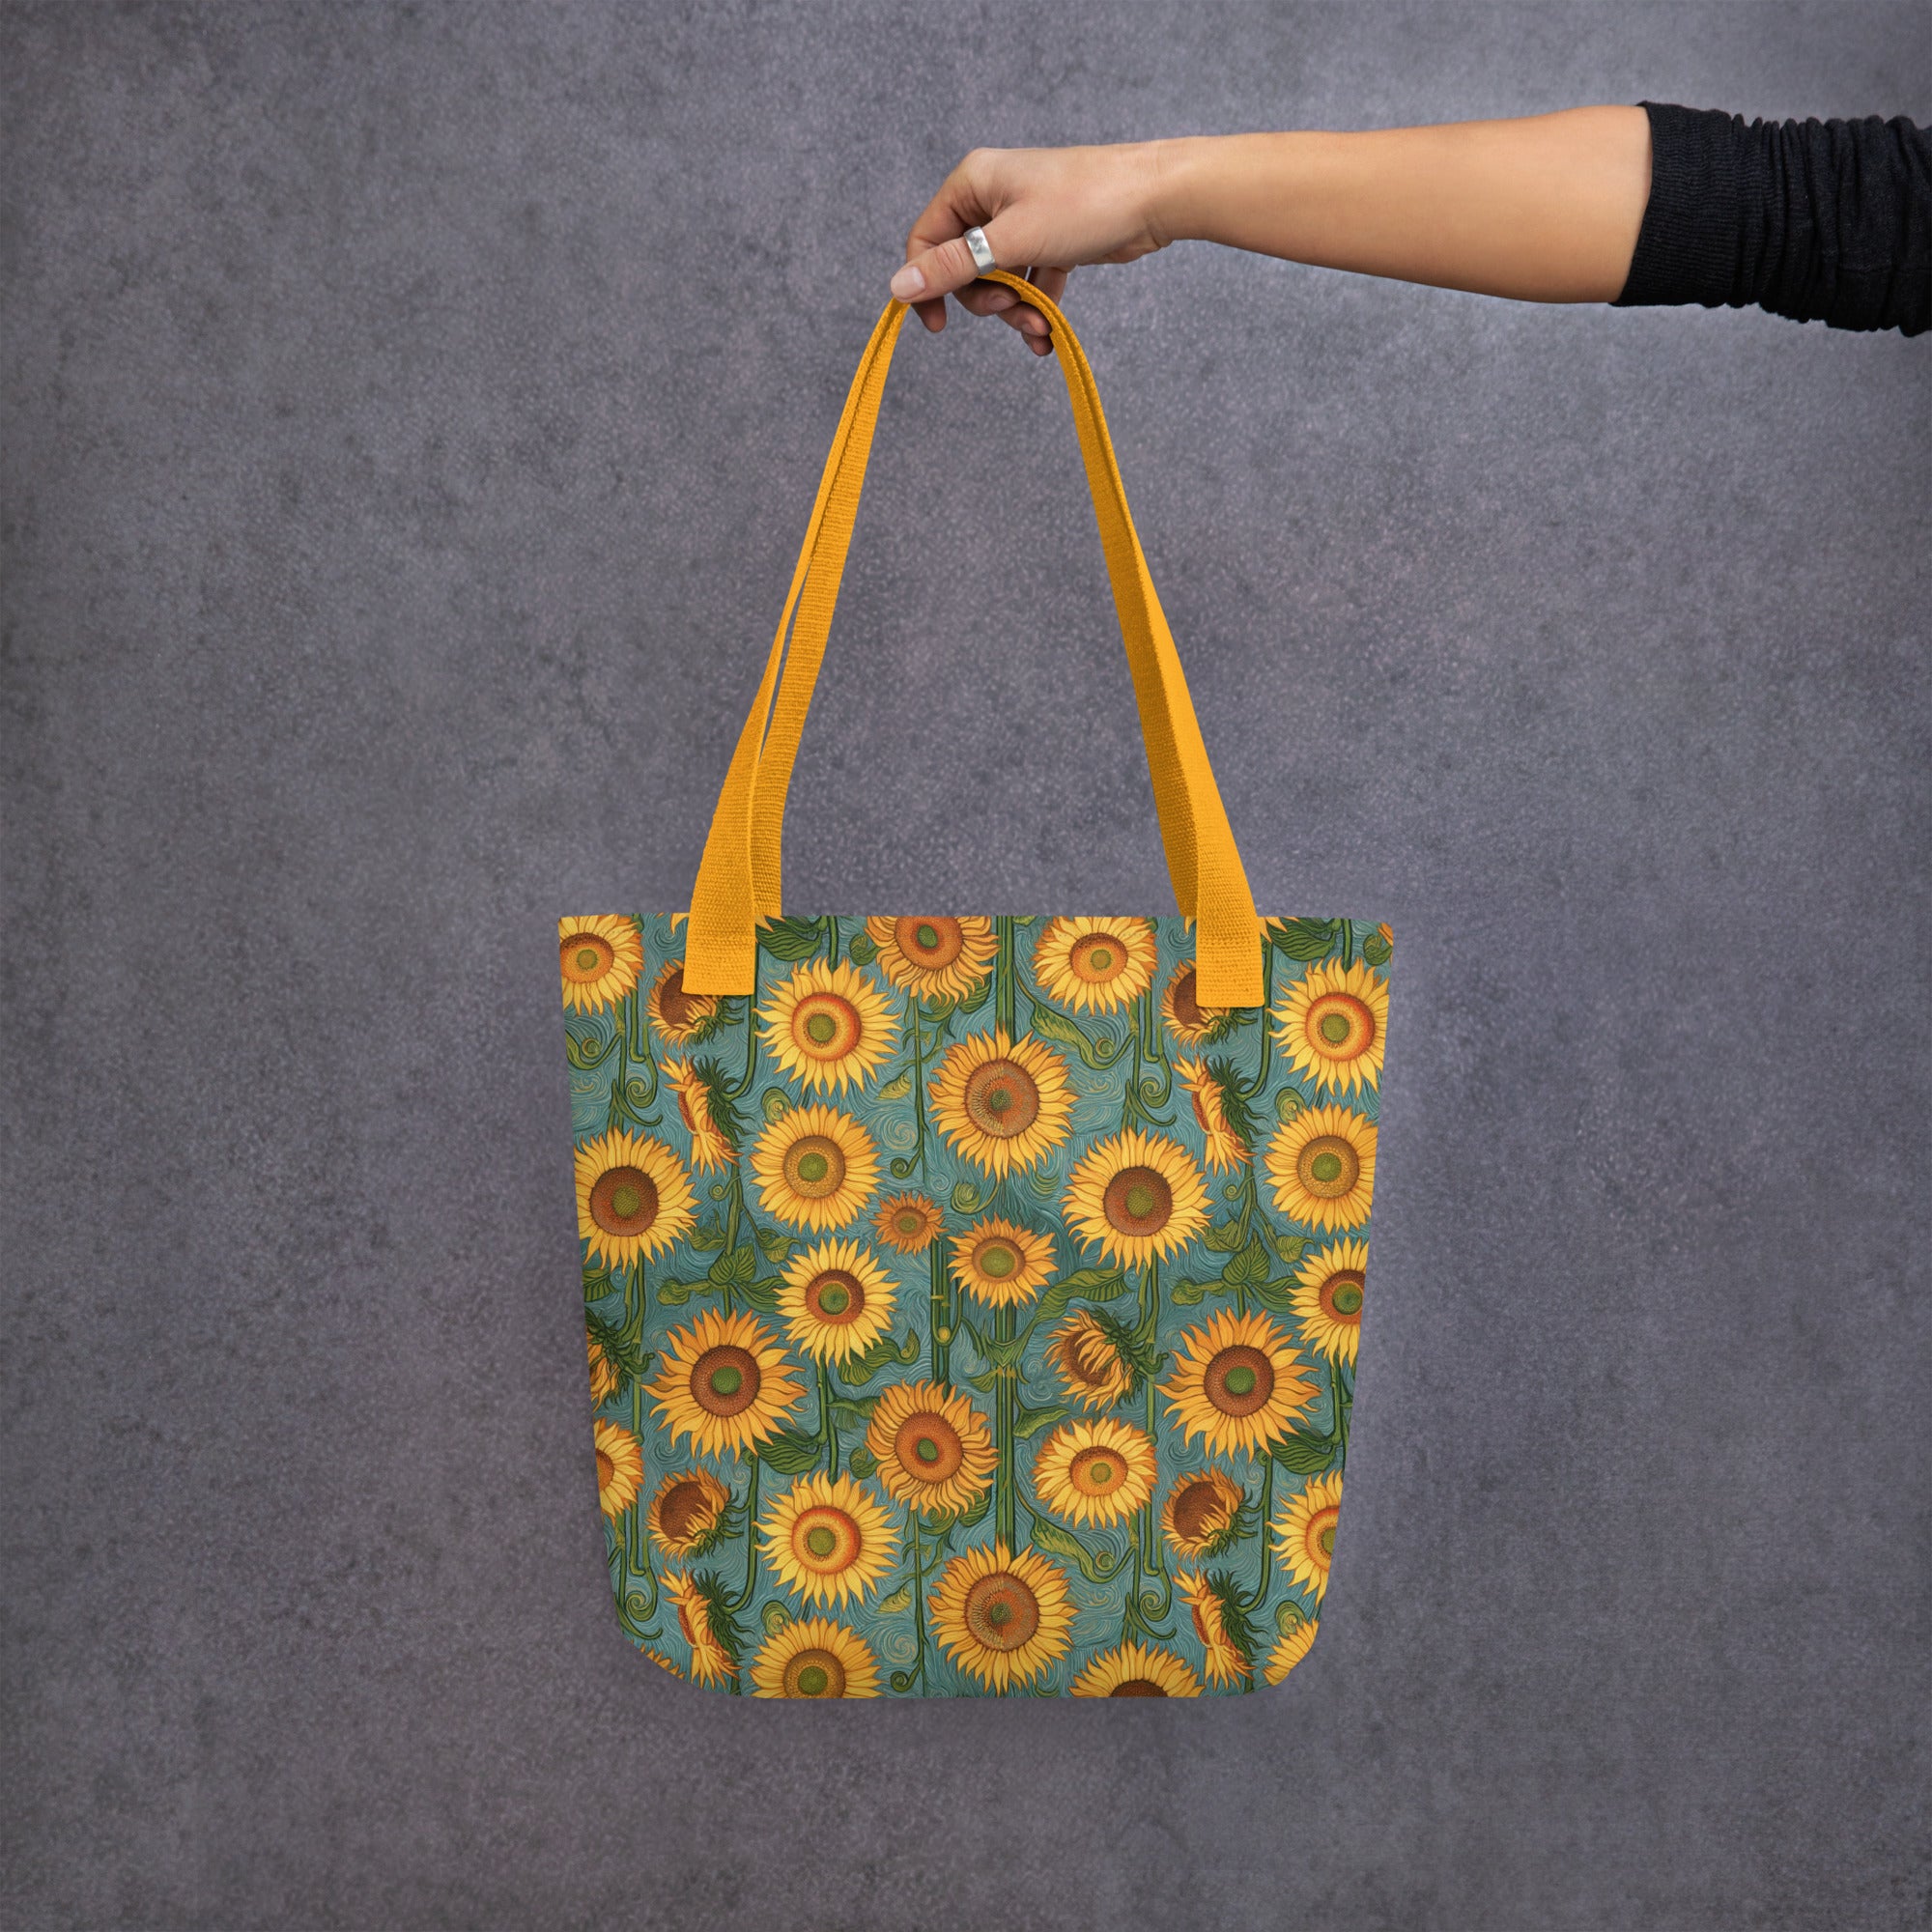 Vincent van Gogh 'Sunflowers' Famous Painting Totebag | Allover Print Art Tote Bag